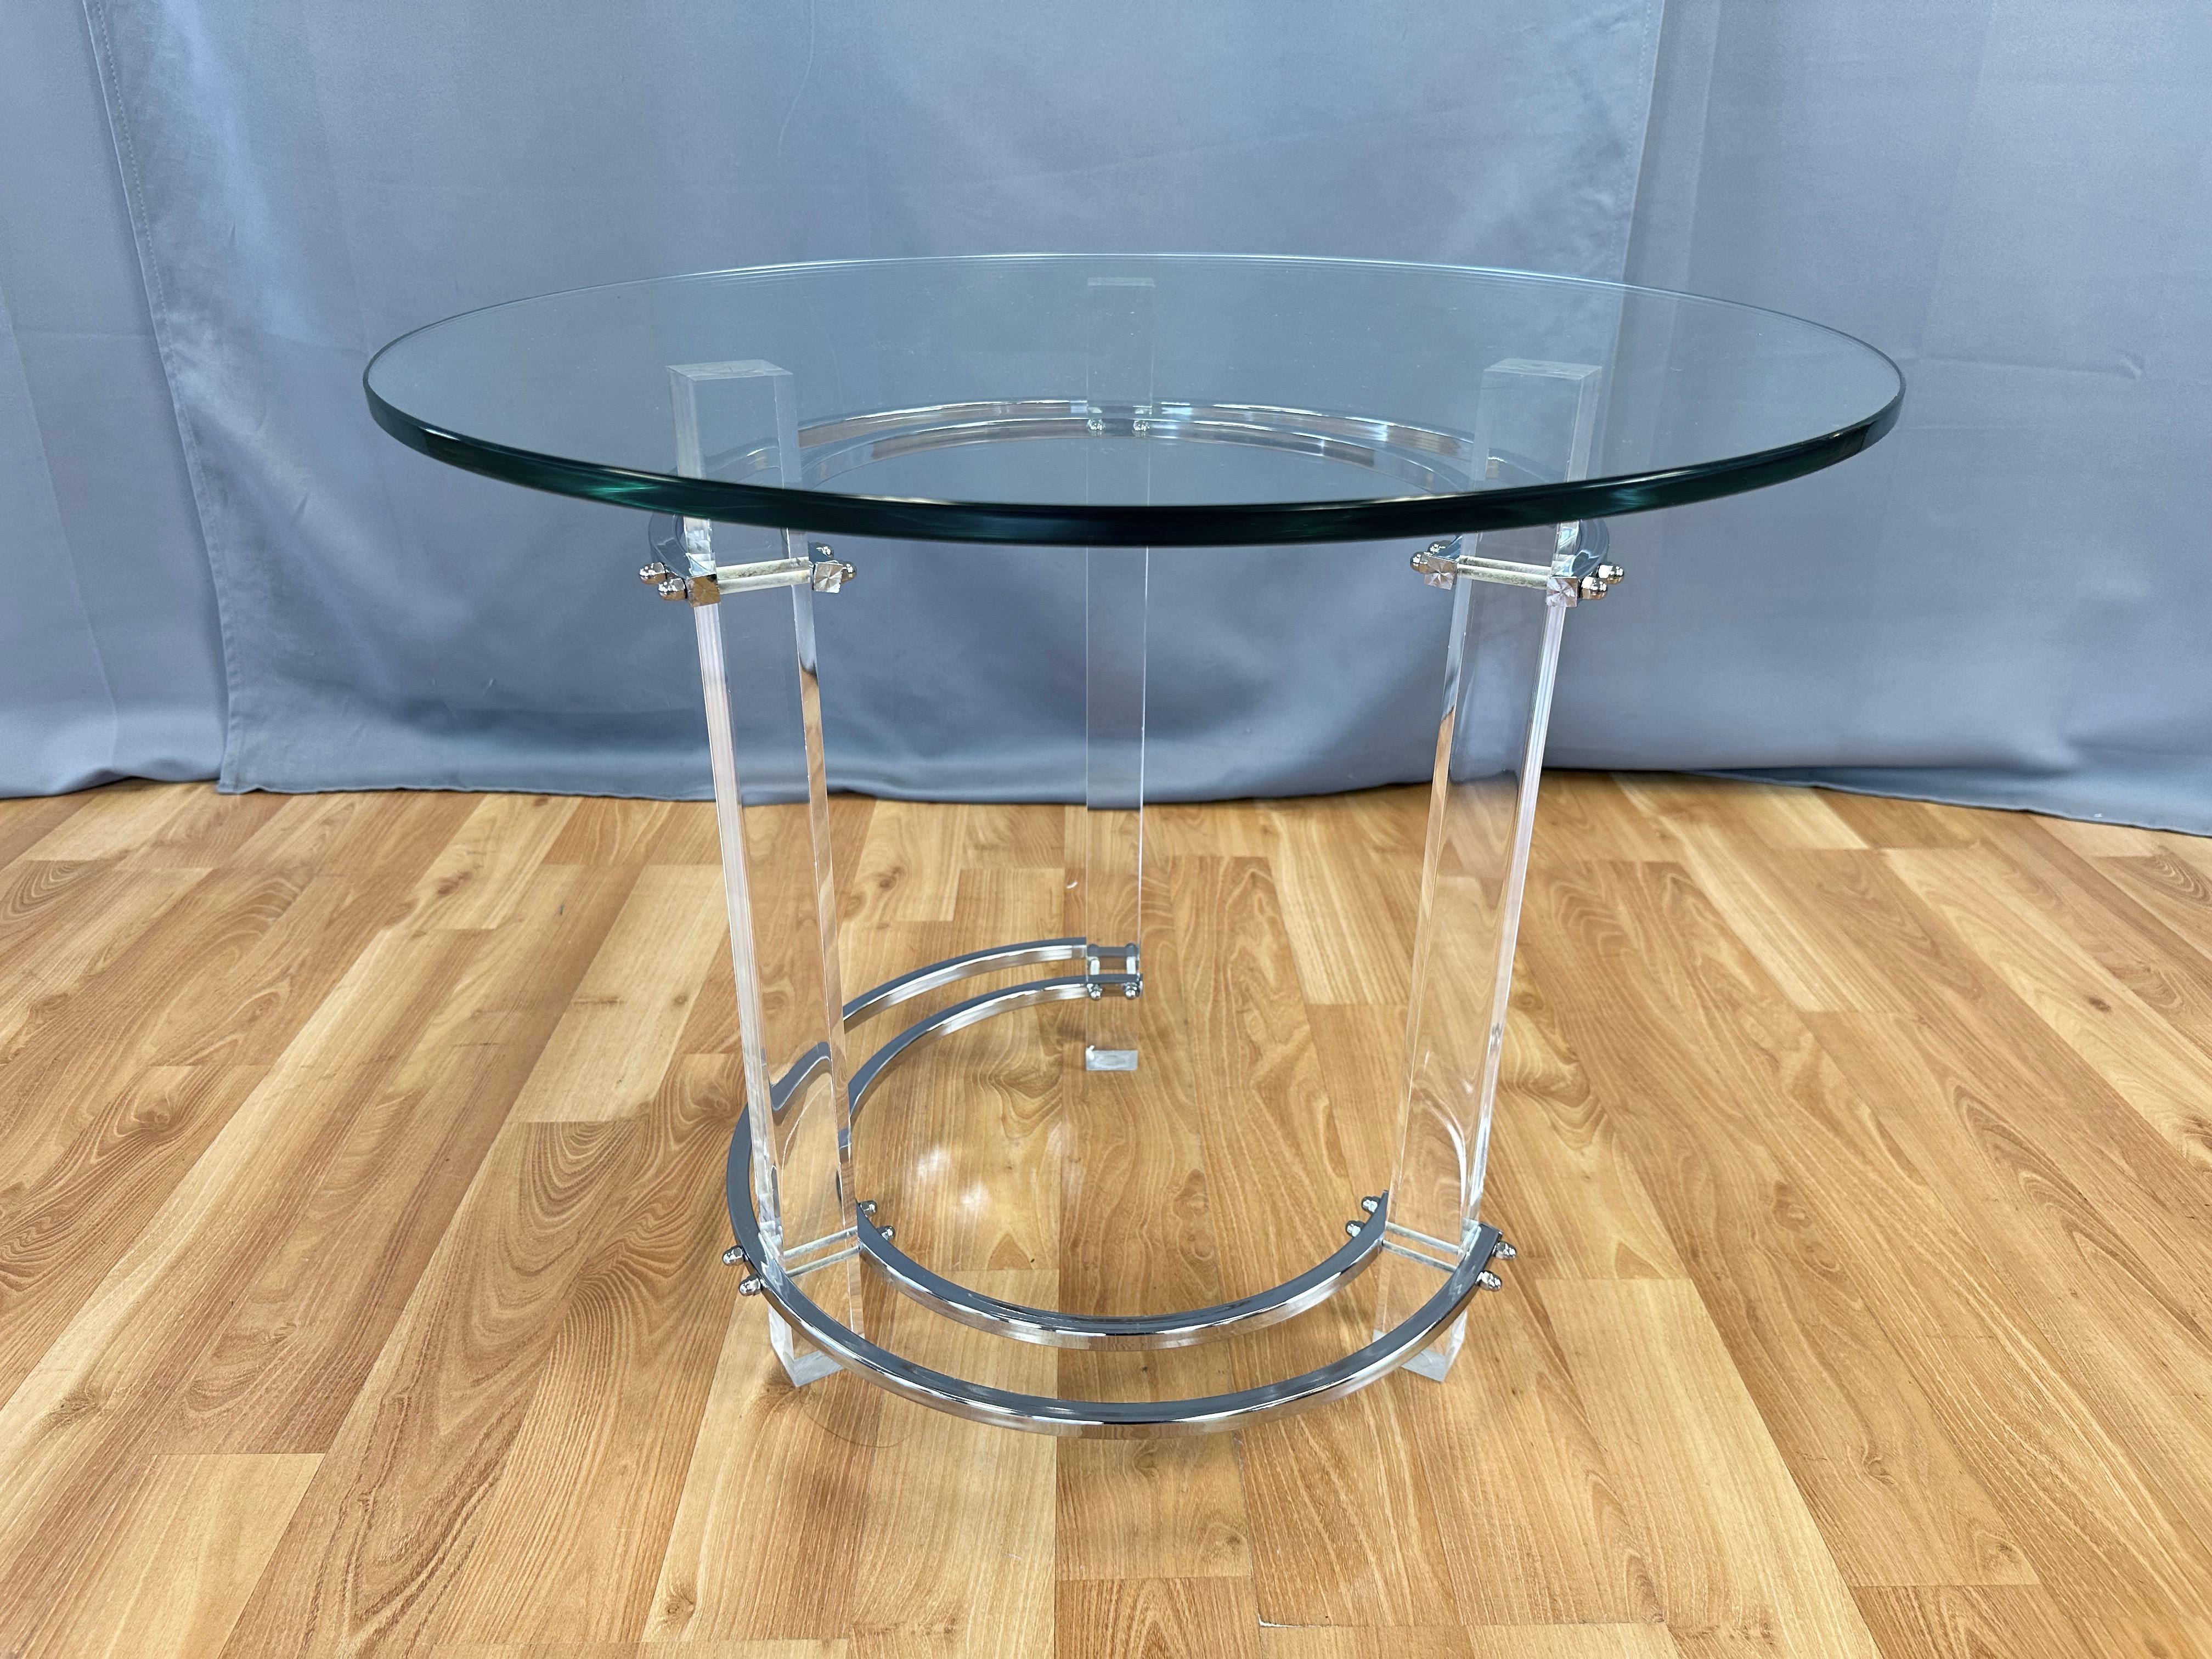 Hollywood Regency Charles Hollis Jones Lucite and Chrome Circular Side Table or End Table, 1970s For Sale